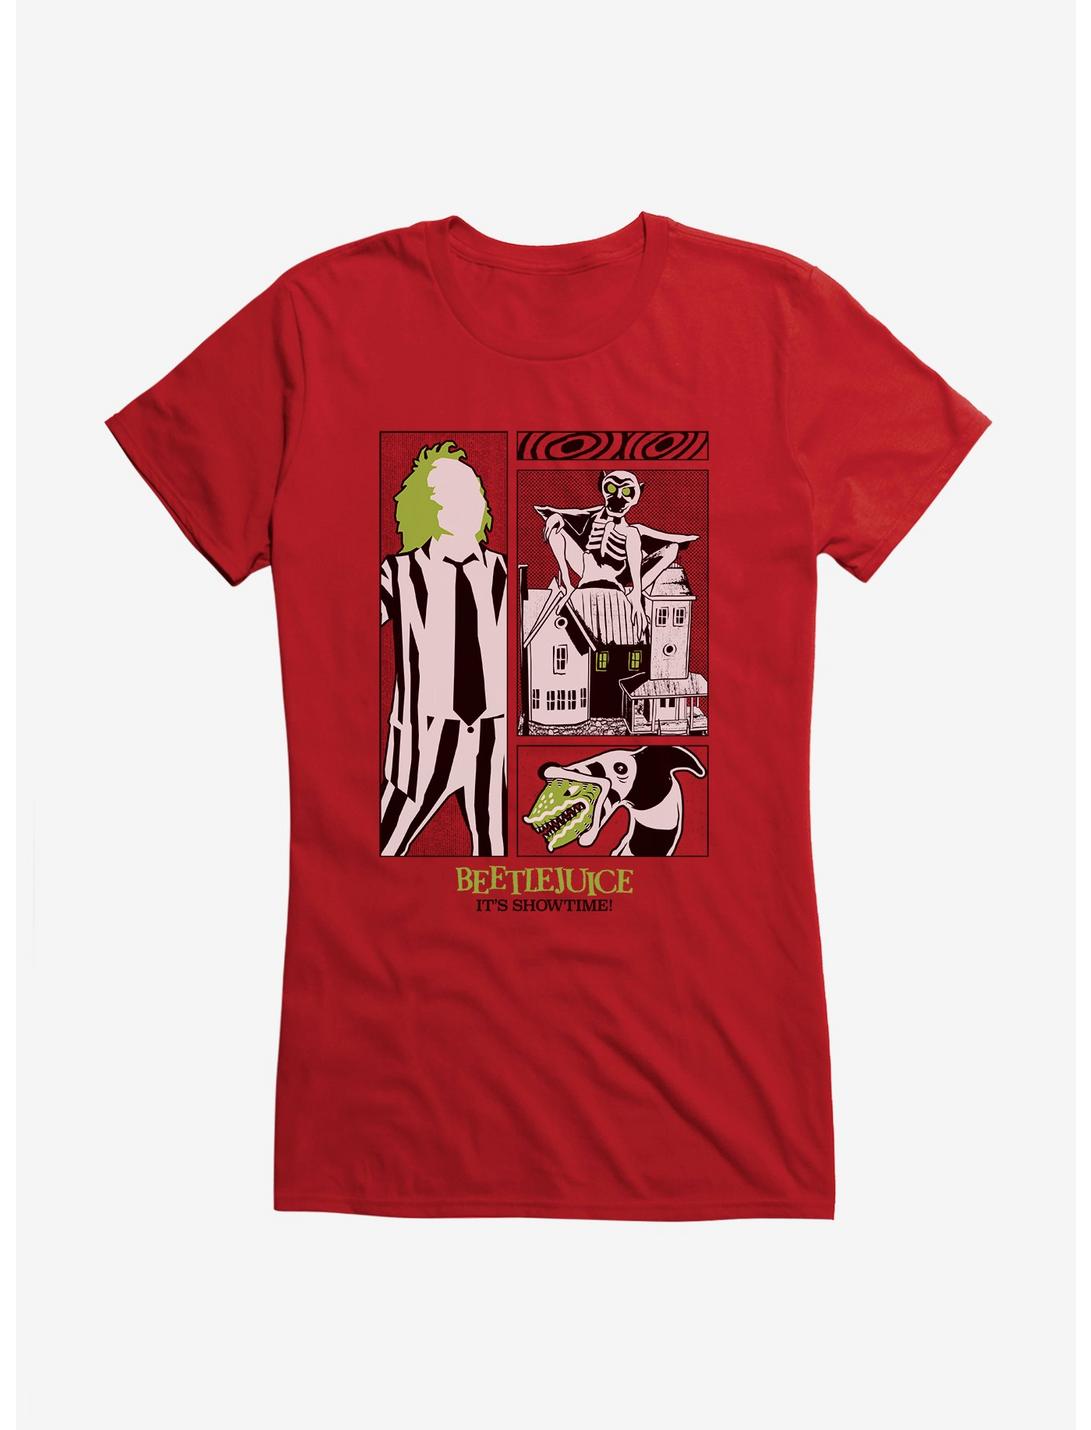 Beetlejuice It's Showtime! Girls T-Shirt, RED, hi-res